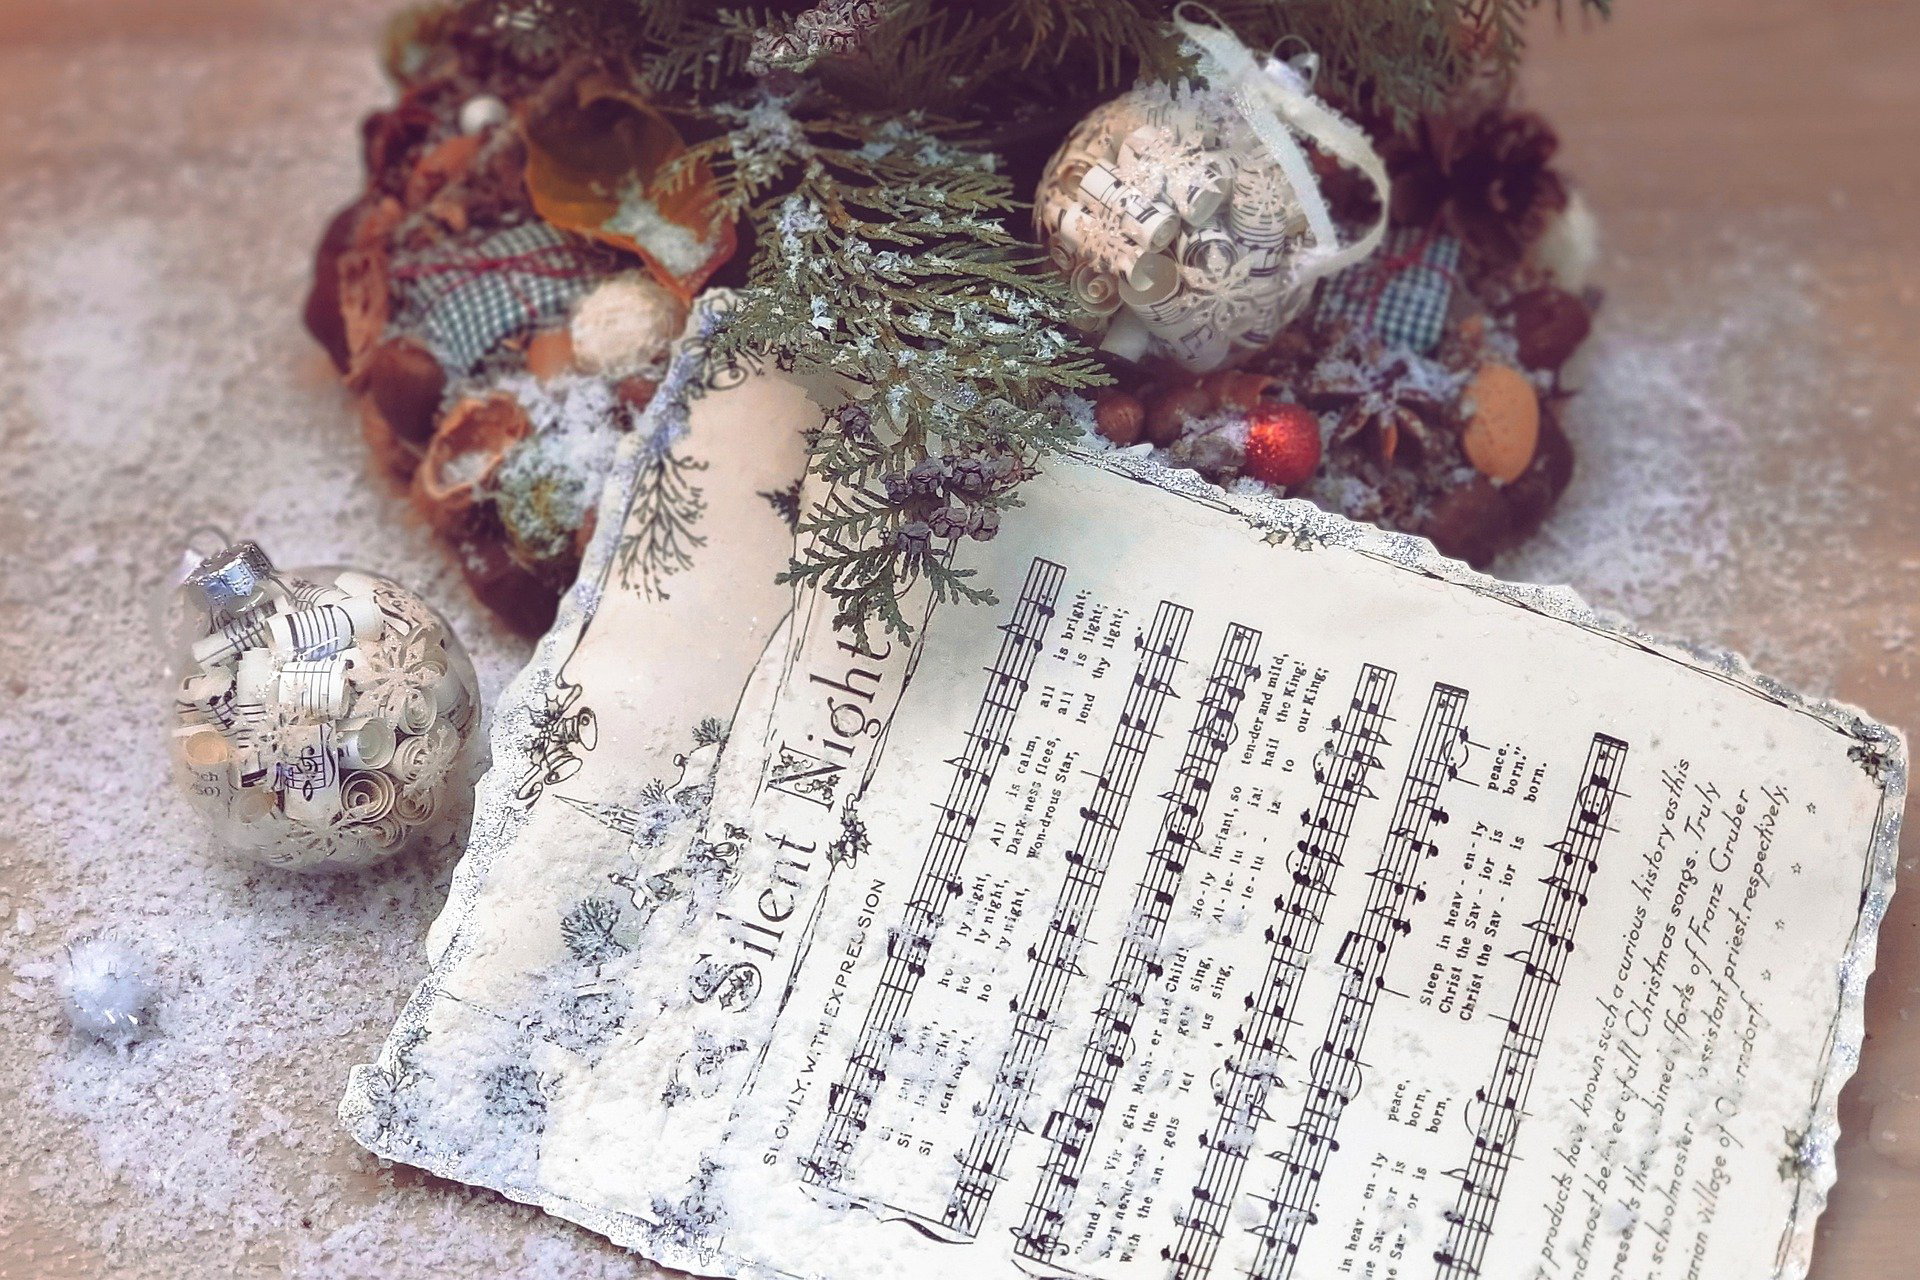 Sheet music and home decorations.